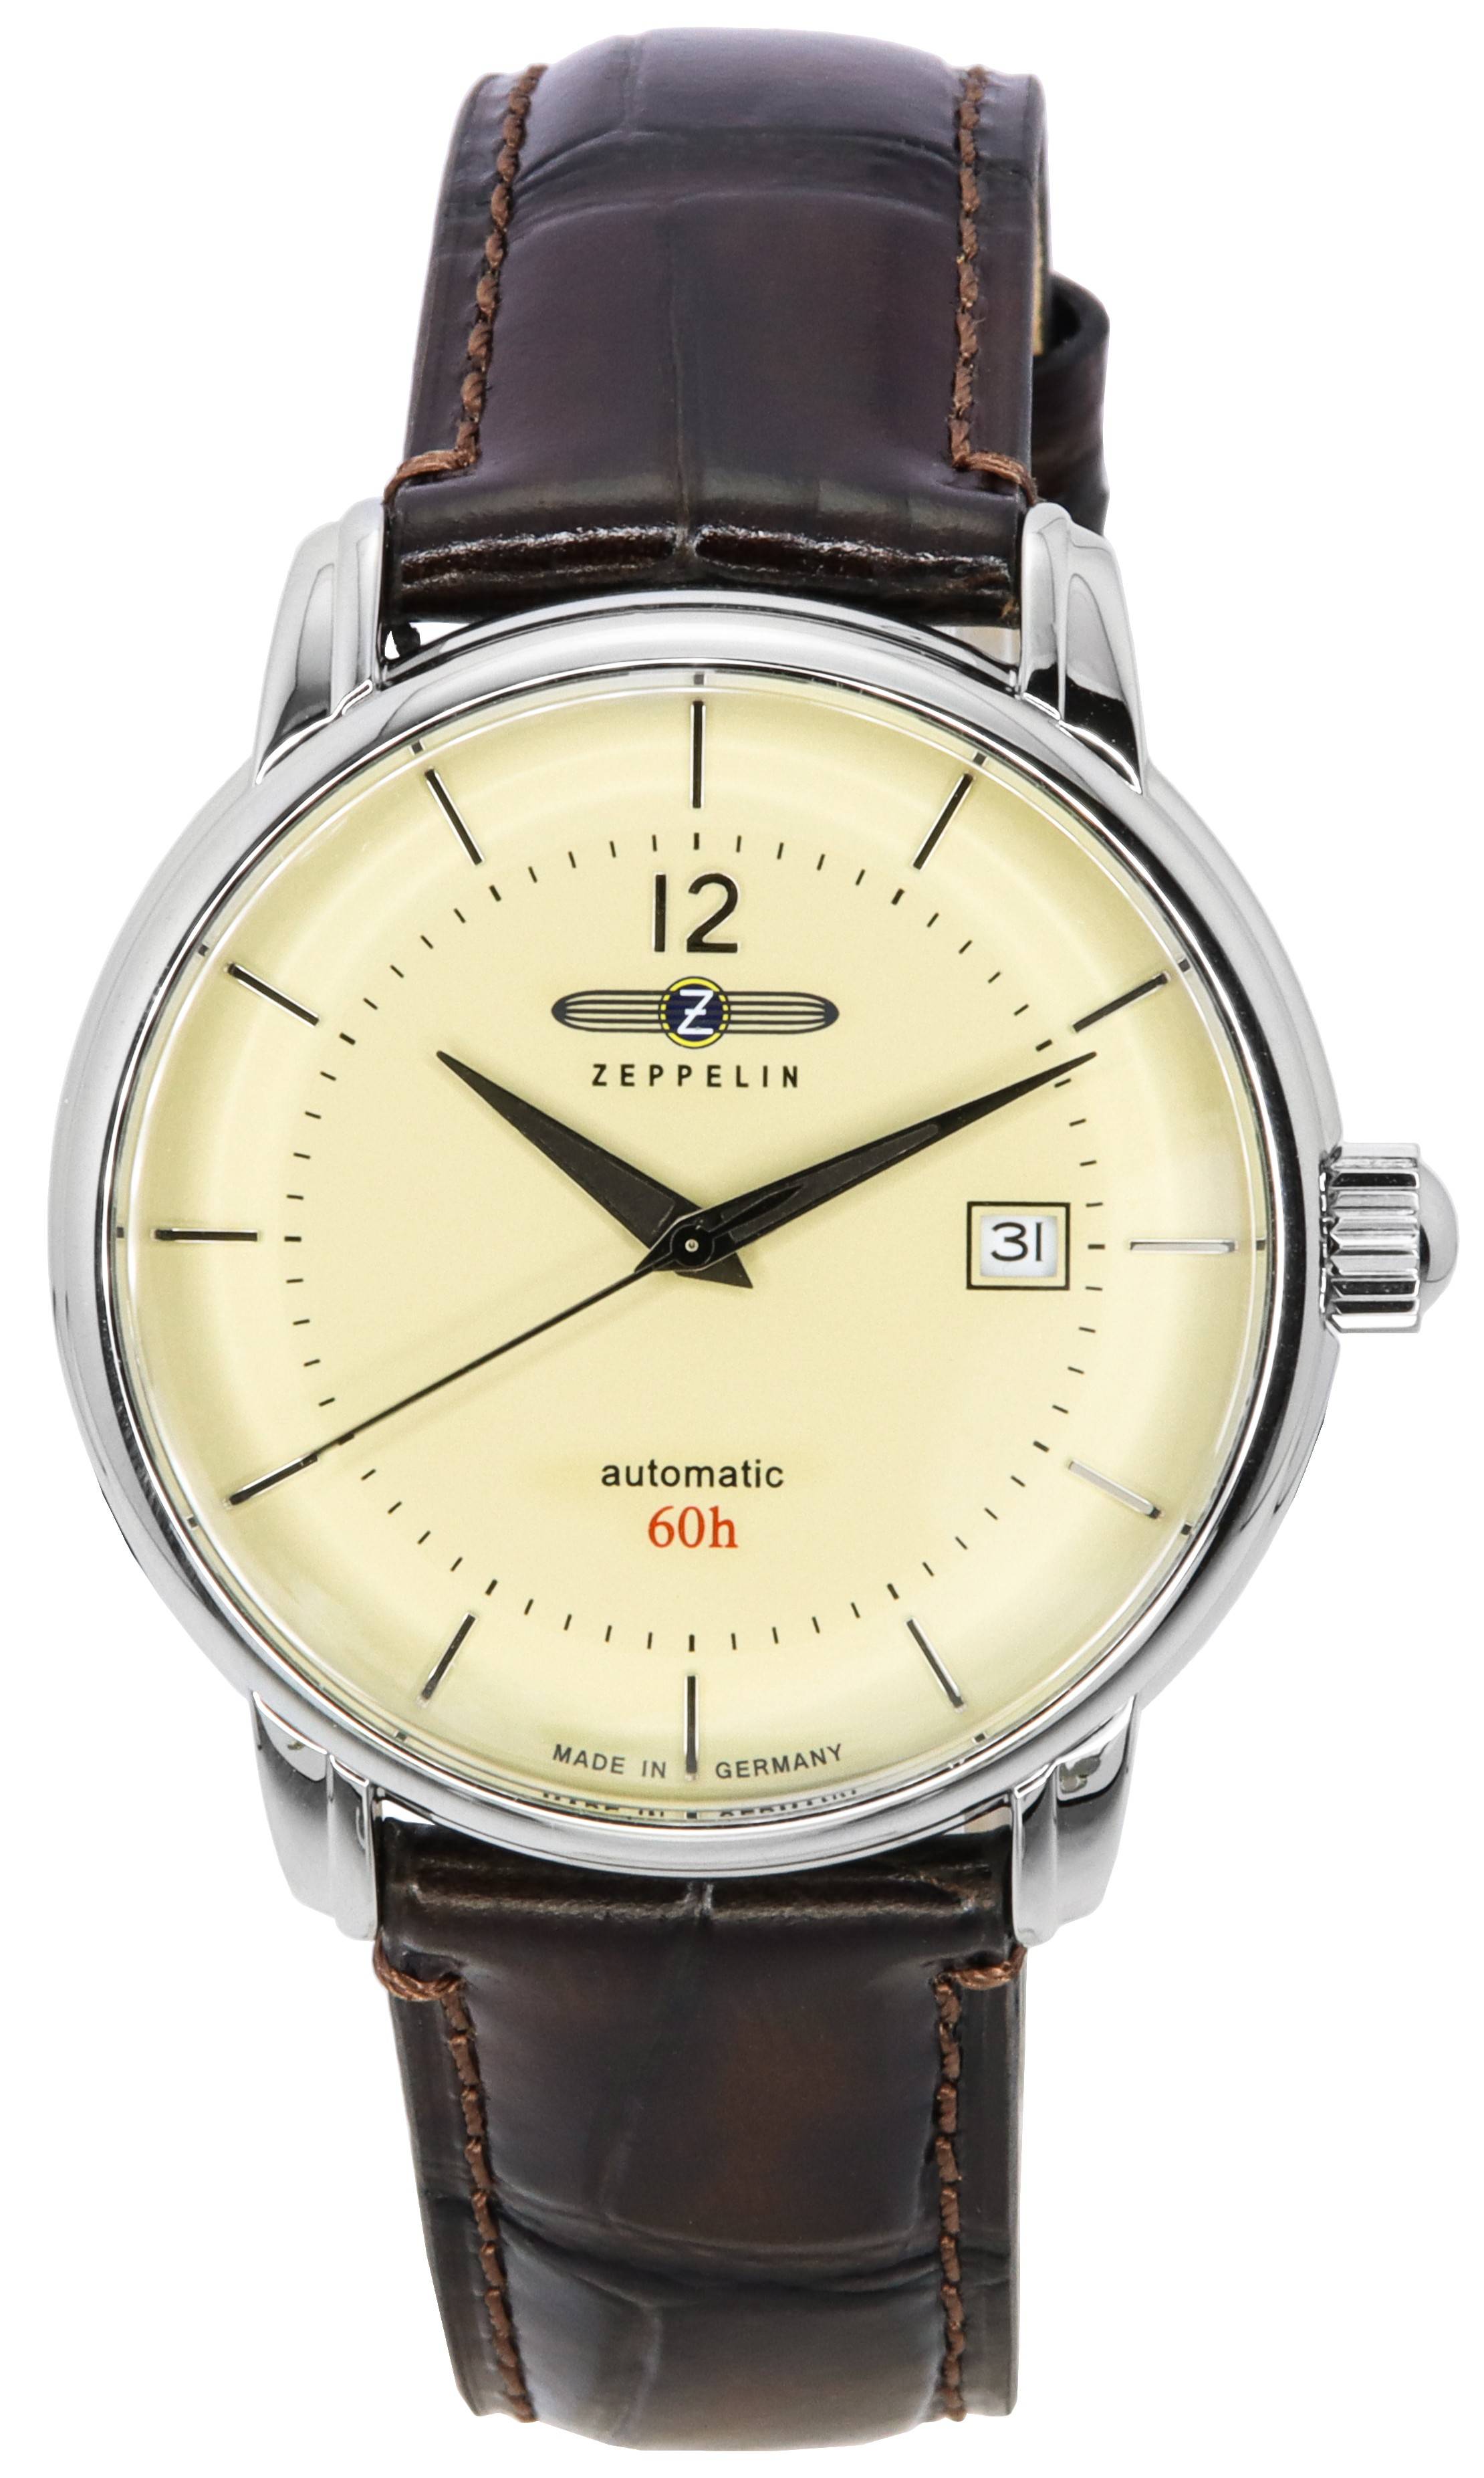 Zeppelin LZ 120 Bodensee Leather Strap Beige Dial Automatic 81605 Men's Watch